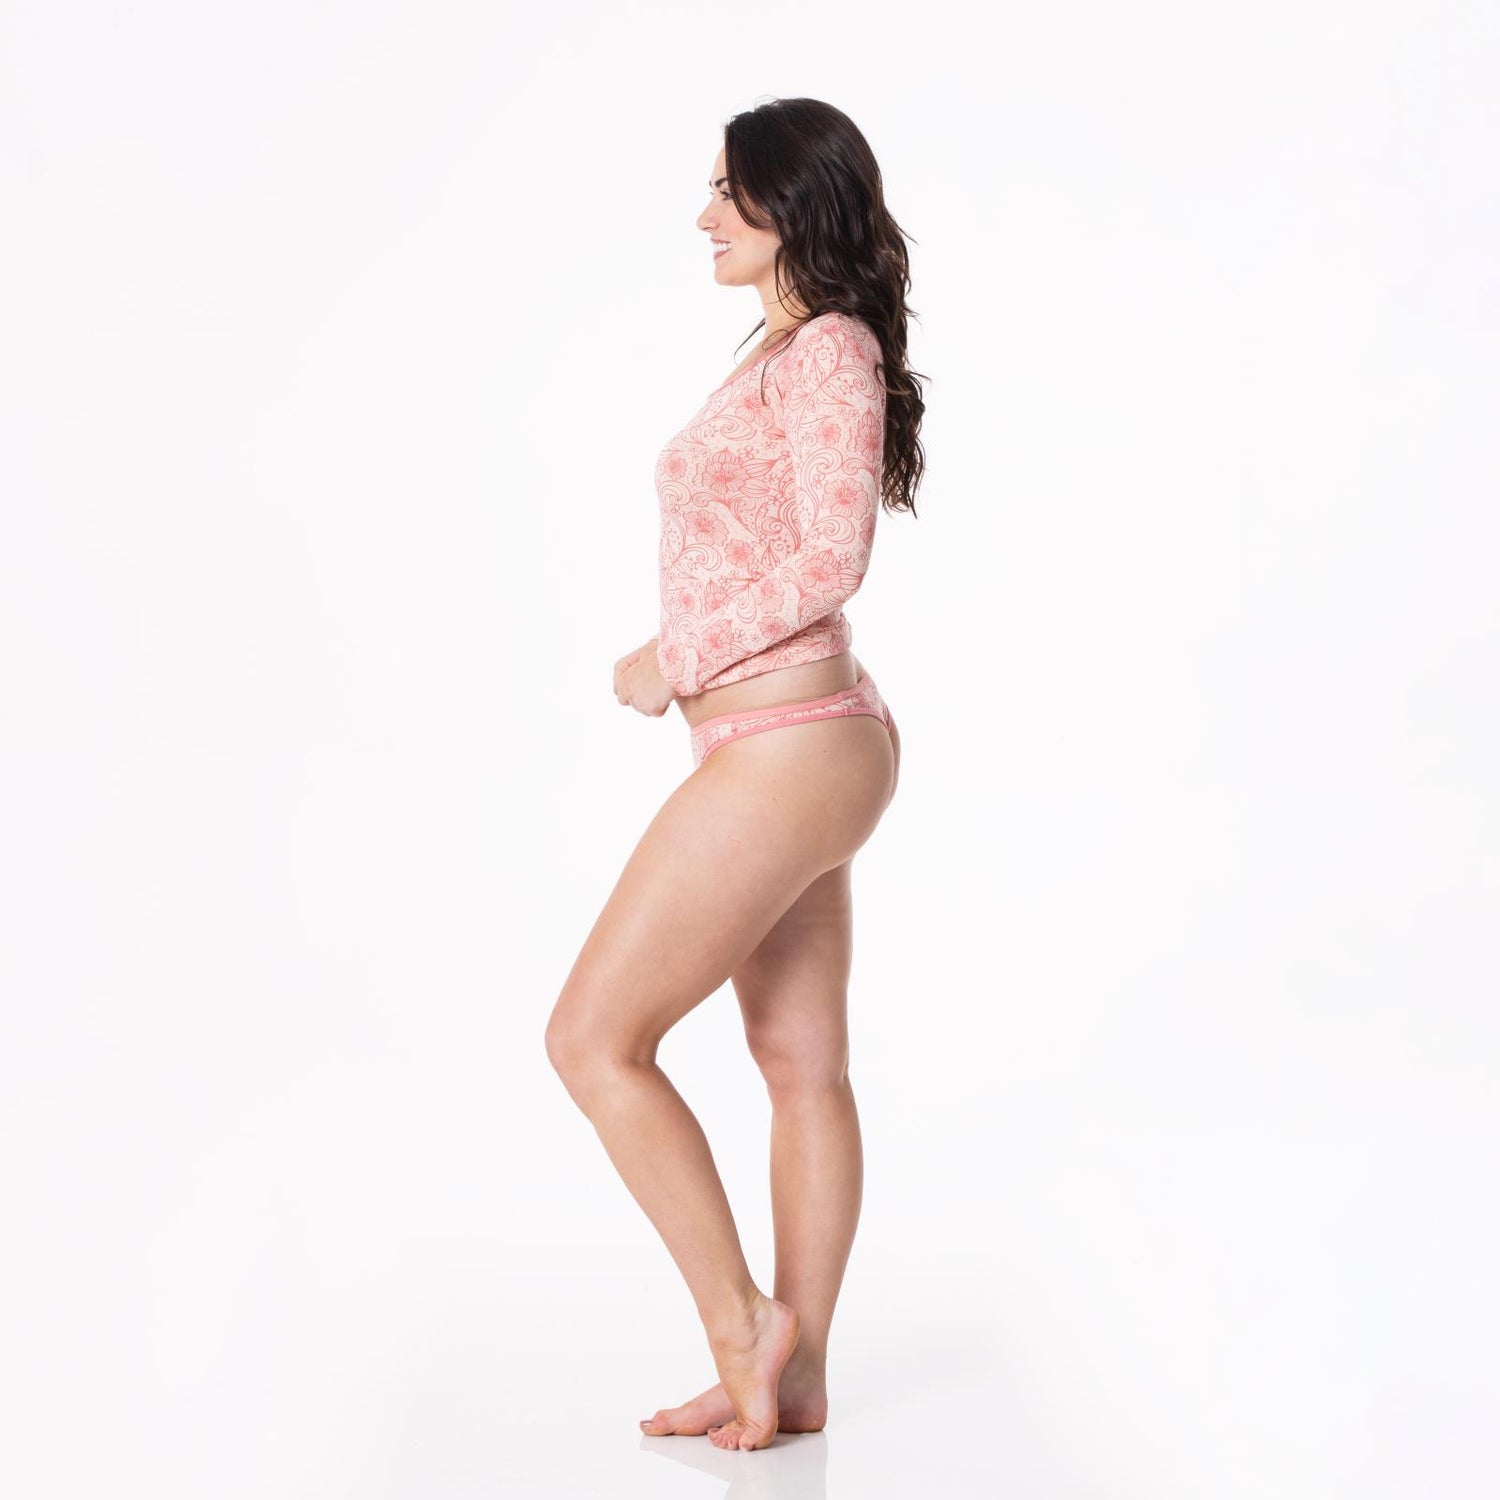 Women's Print Classic Thong in Peach Blossom Lace